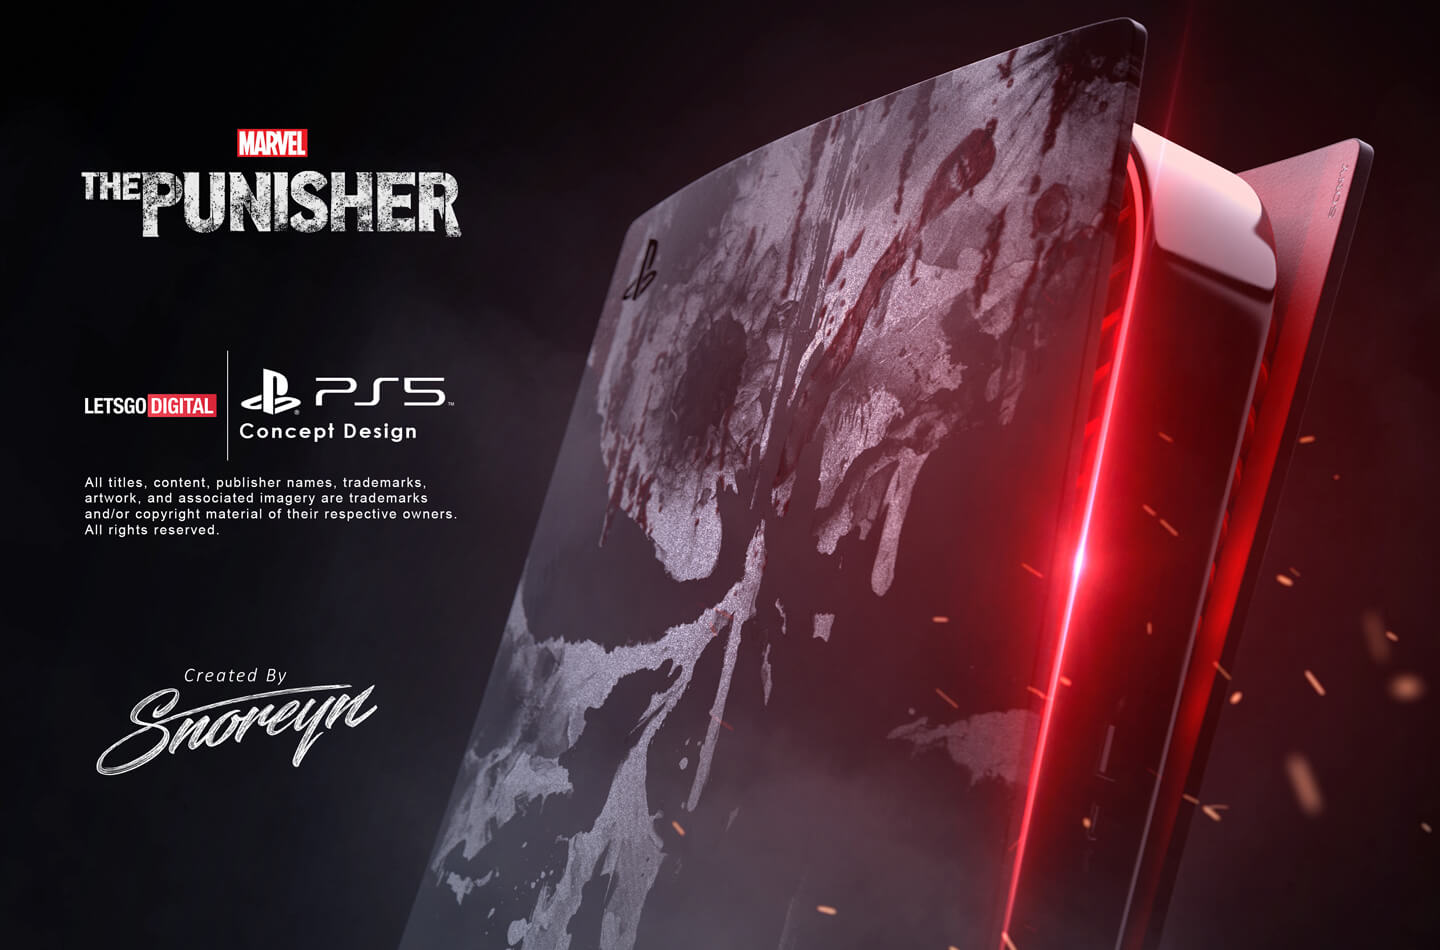 PS5 skin cover dedicated to Marvel character The Punisher